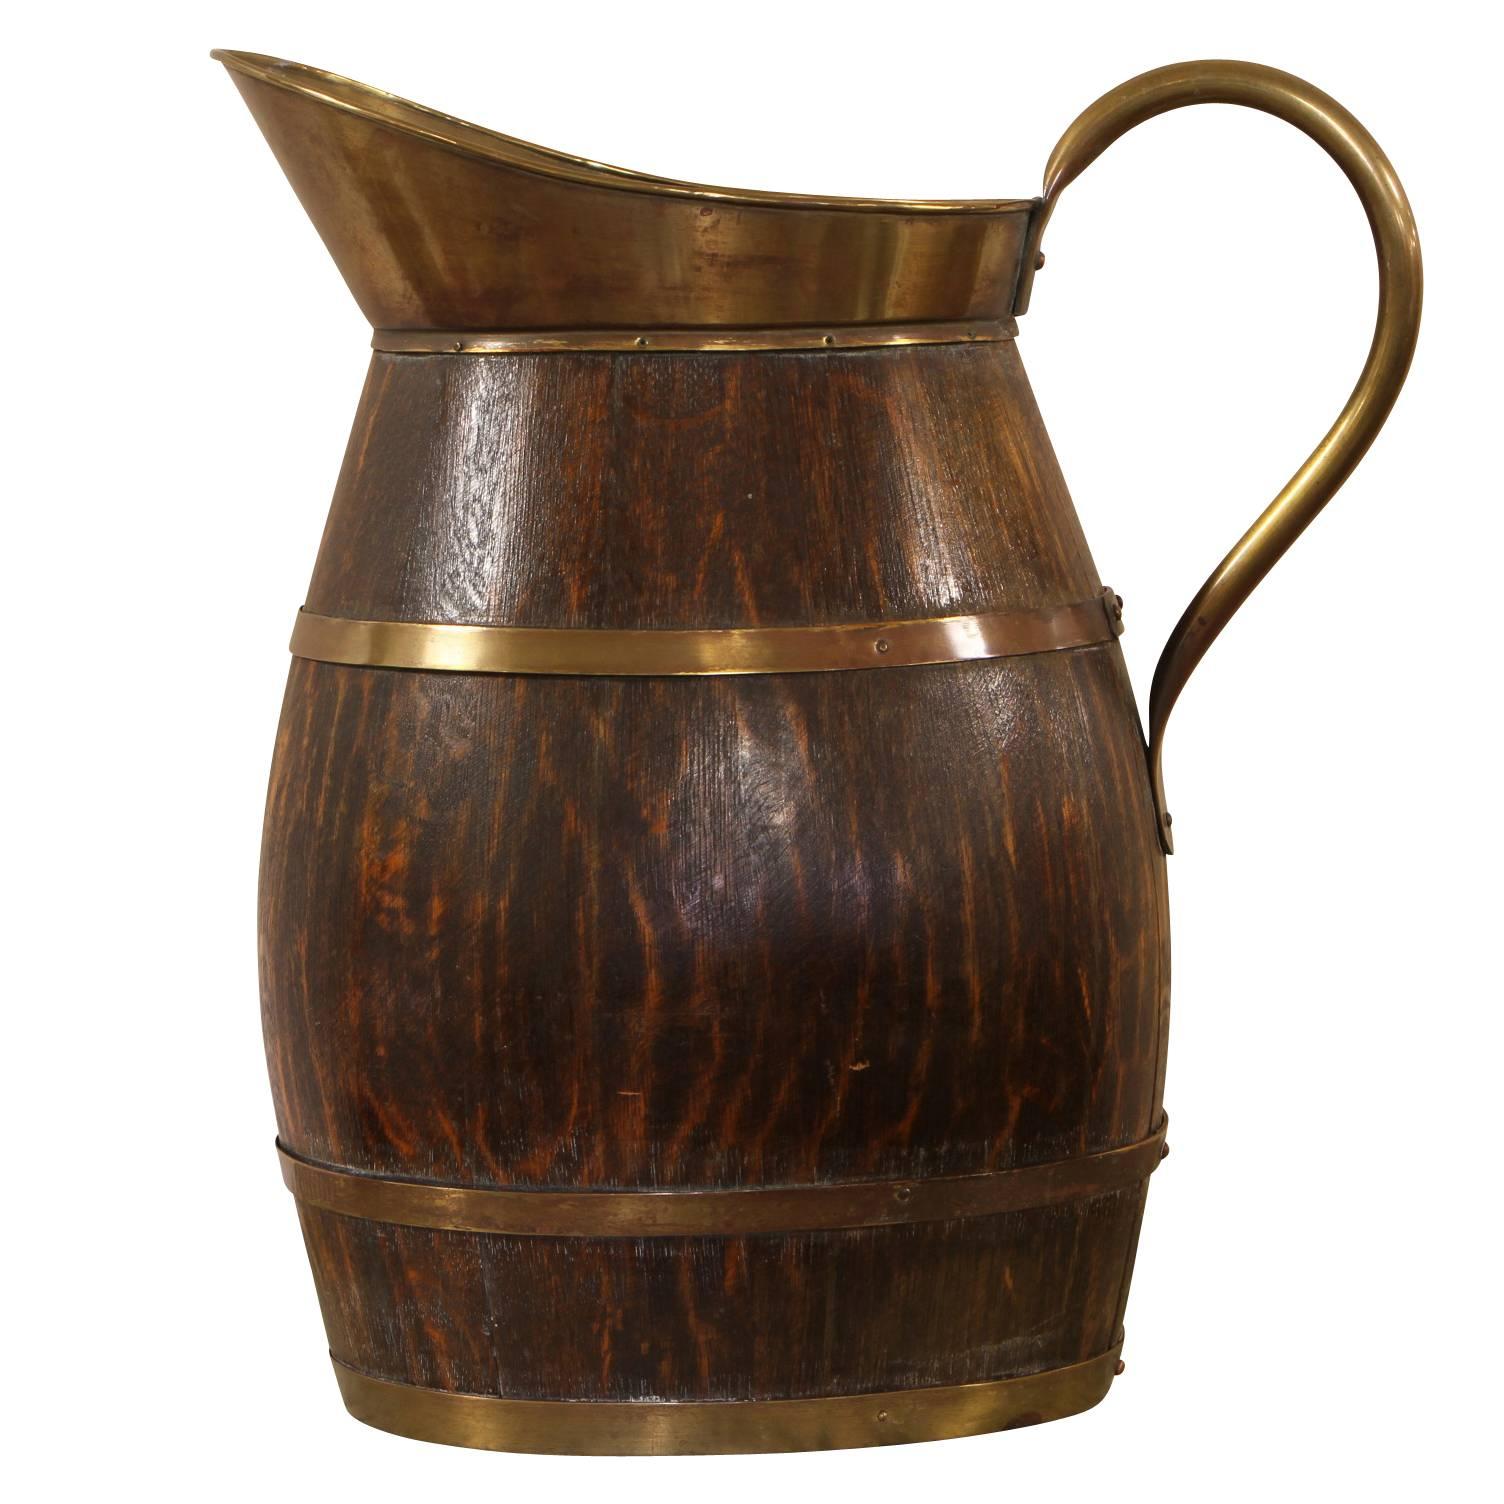 Very Large and Decorative 19th Century Oak Pitcher